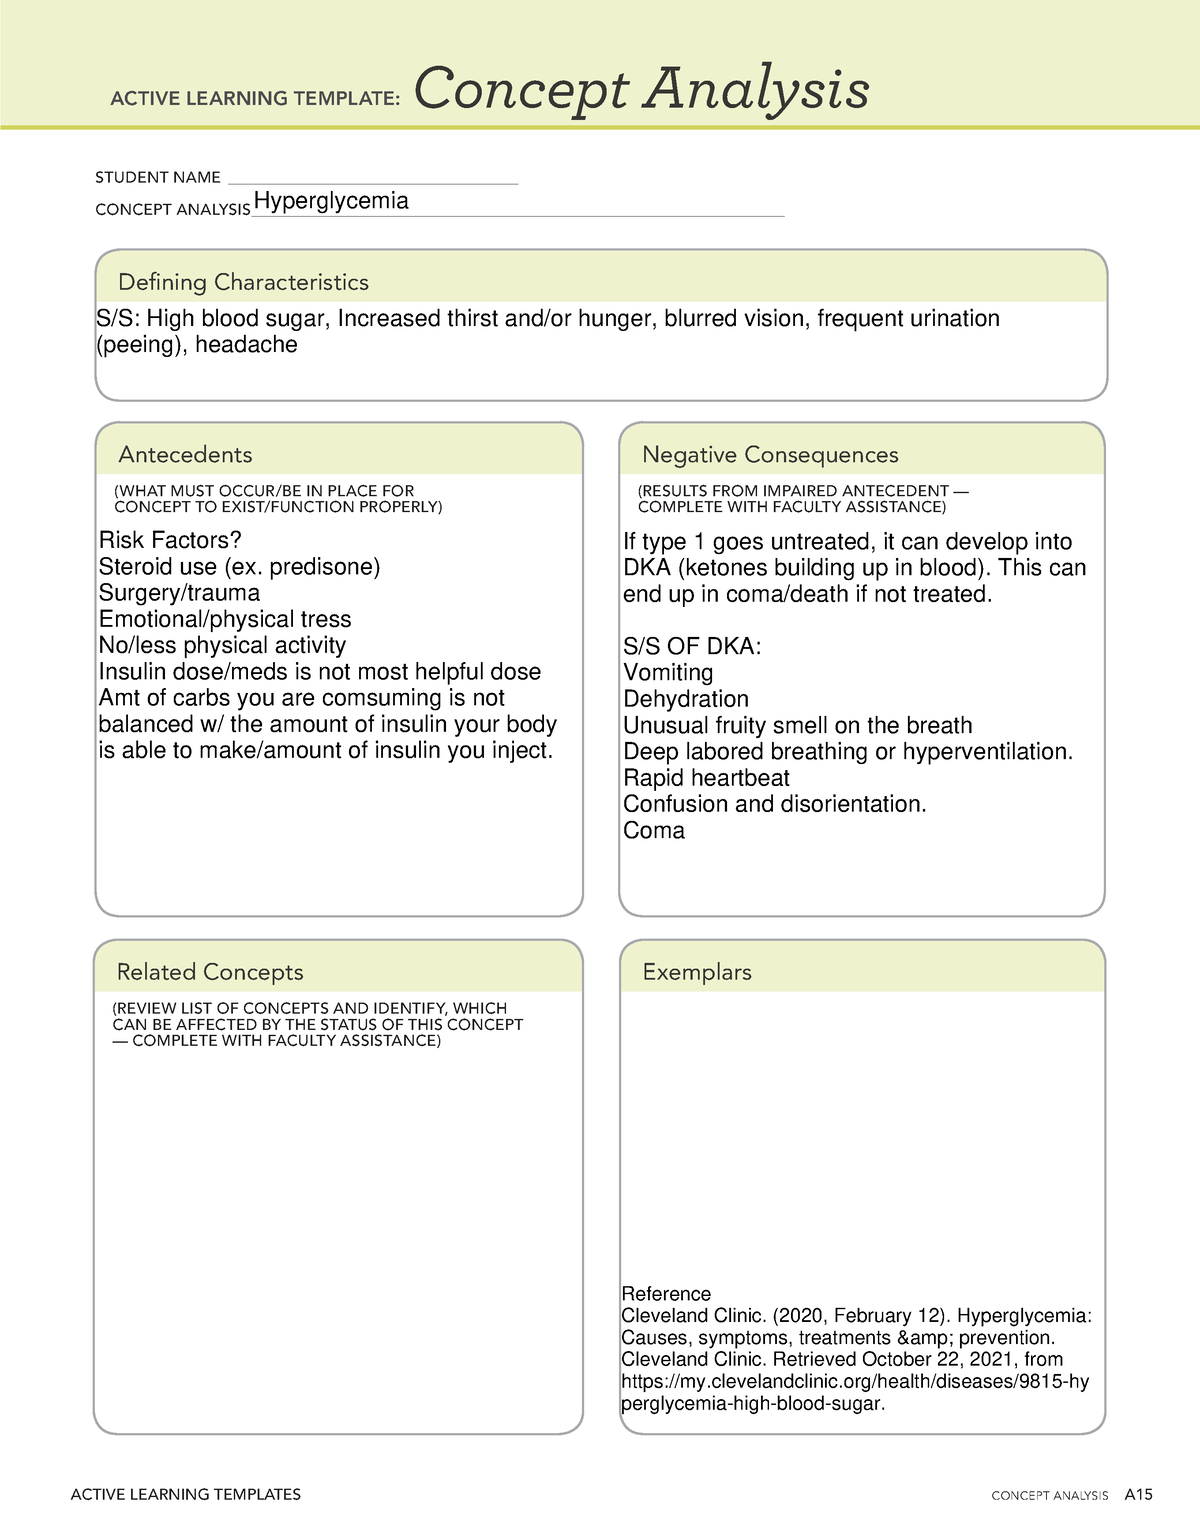 hypergylcemia-concept-analysis-active-learning-templates-concept-analysis-a-concept-analysis